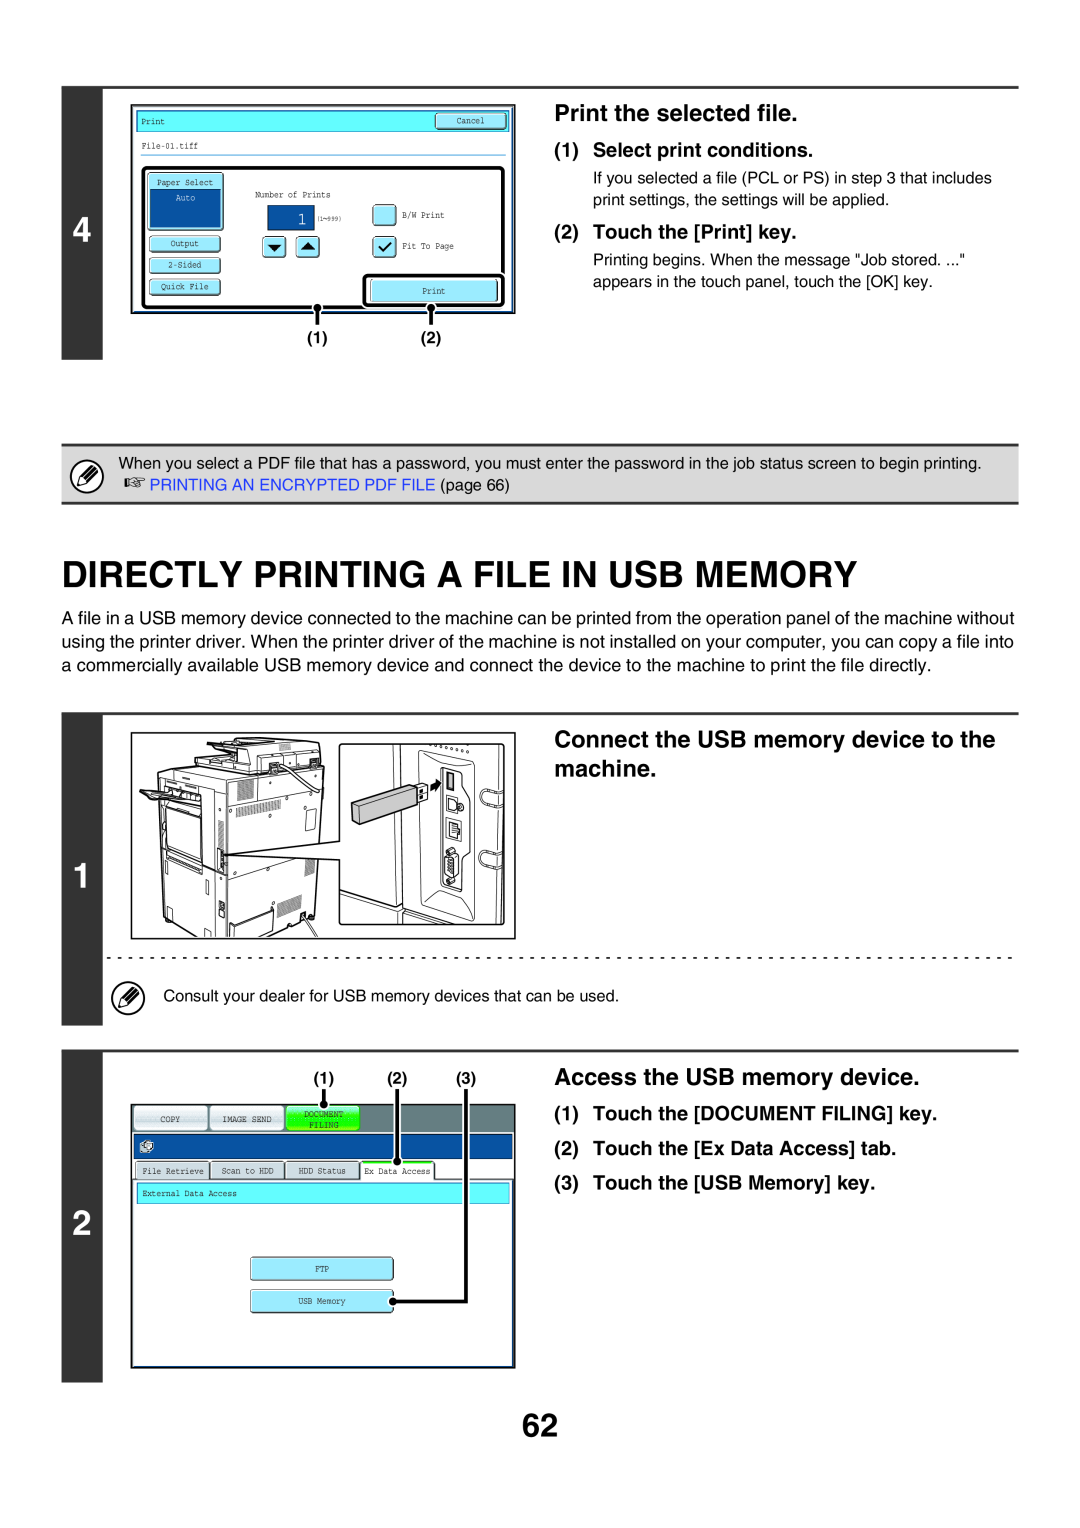 Sharp MX-5500N, MX-6200N Directly Printing A File In Usb Memory, Print the selected file, Access the USB memory device 